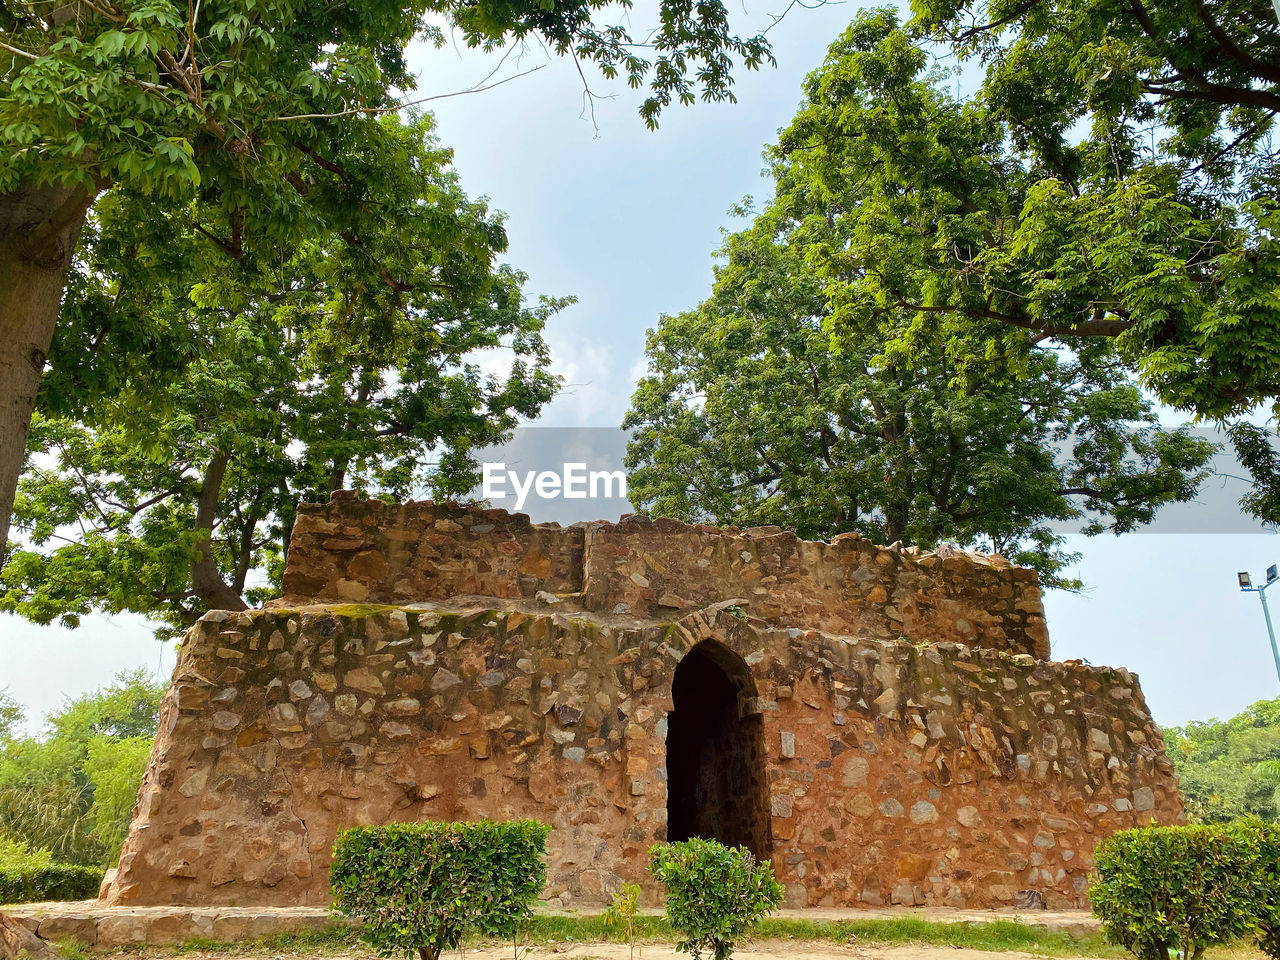 architecture, tree, plant, history, the past, built structure, ancient, nature, ruins, building, old ruin, building exterior, travel destinations, no people, travel, archaeological site, old, day, sky, outdoors, wall, tourism, rural area, ancient history, religion, stone material, ancient civilization, green, growth, temple - building